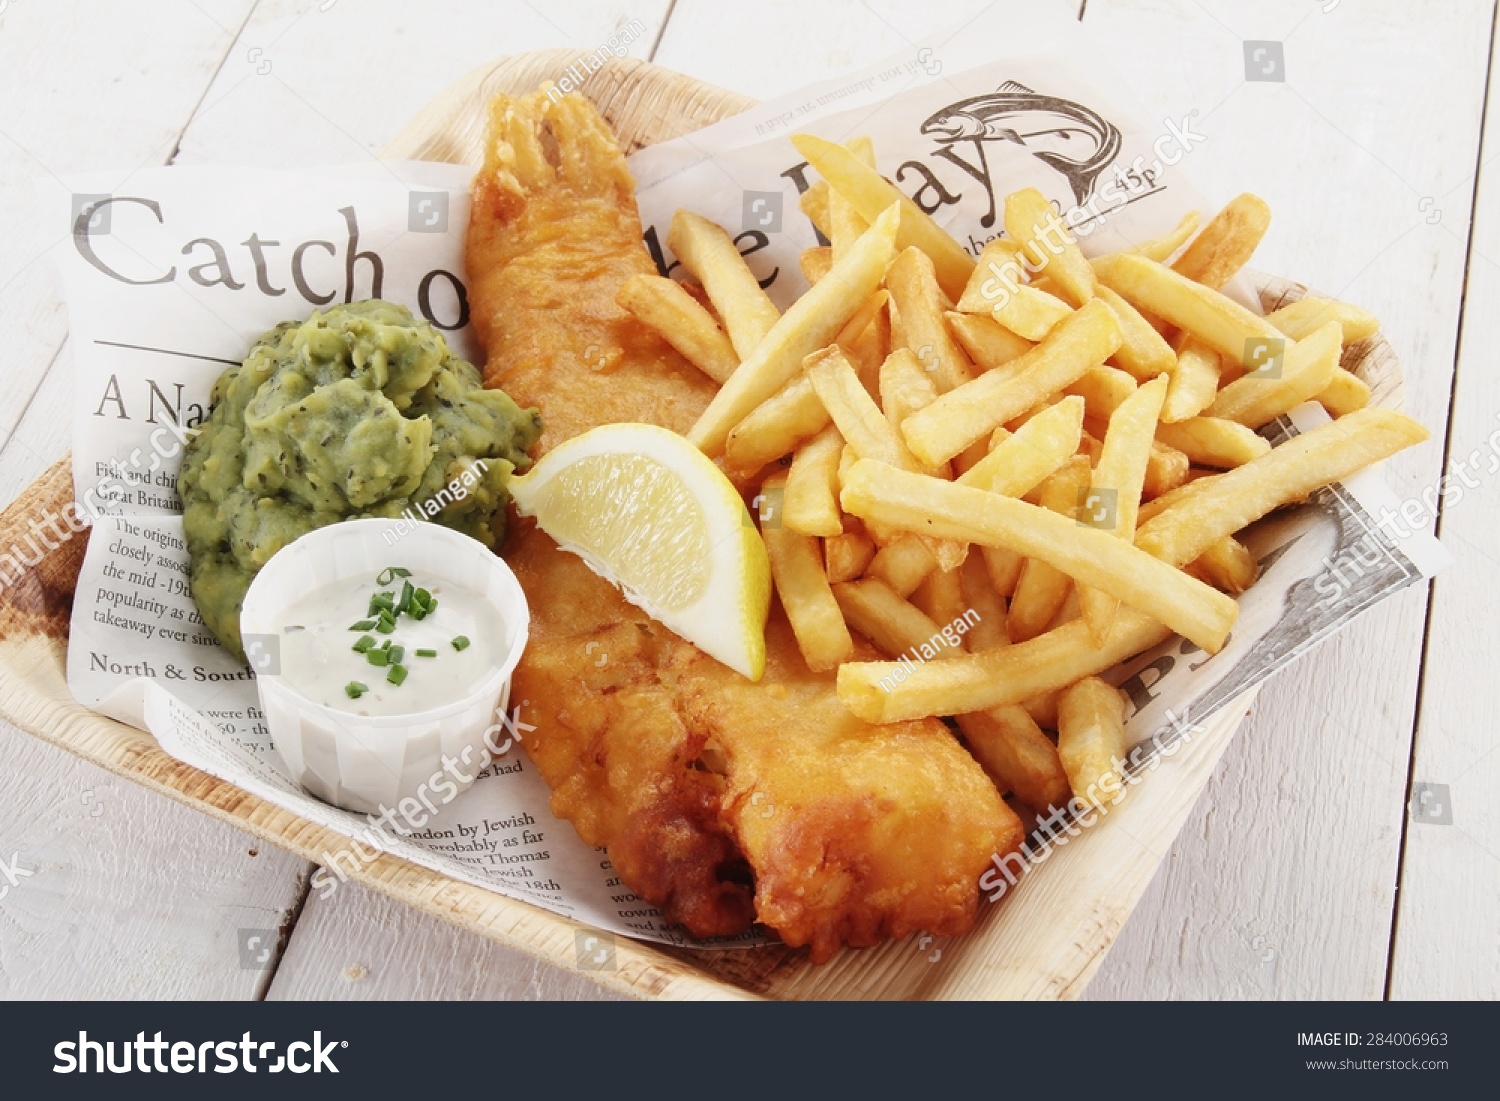 traditional British fish and chips #284006963